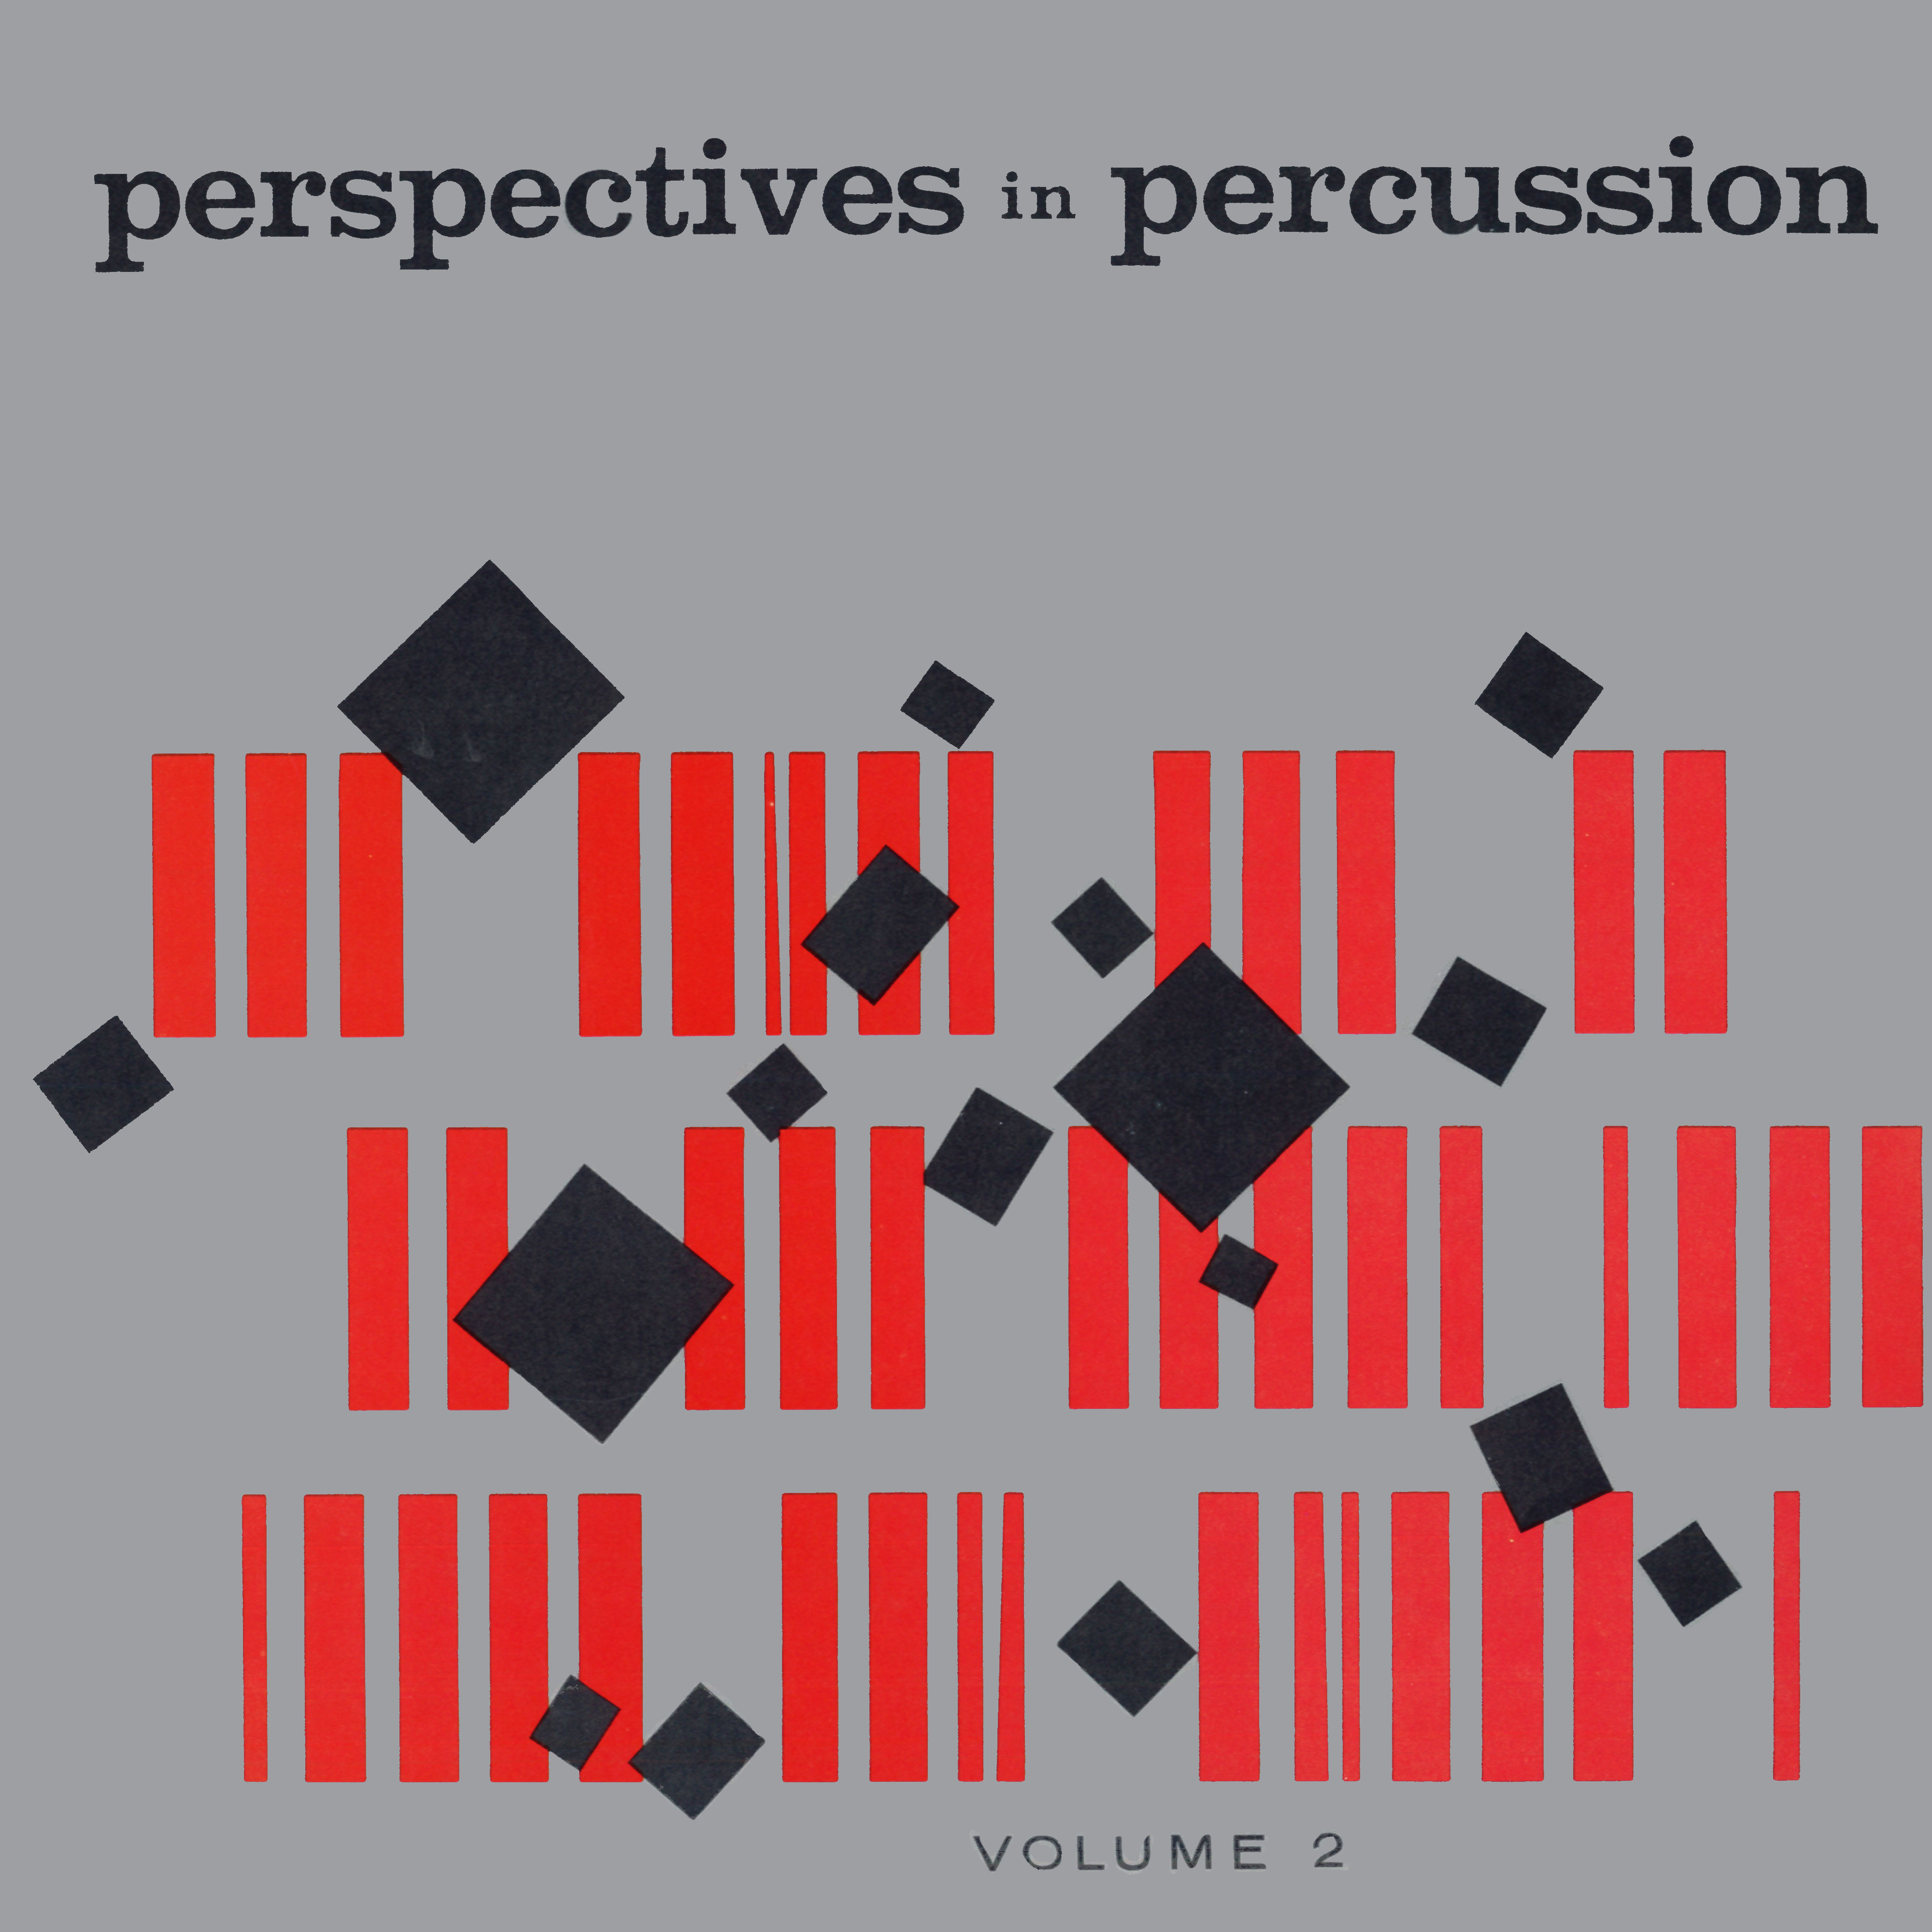 Skip Martin - Perspectives In Percussion, Vol. 2 (Remastered) (1961/2020) [FLAC 24bit/96kHz]